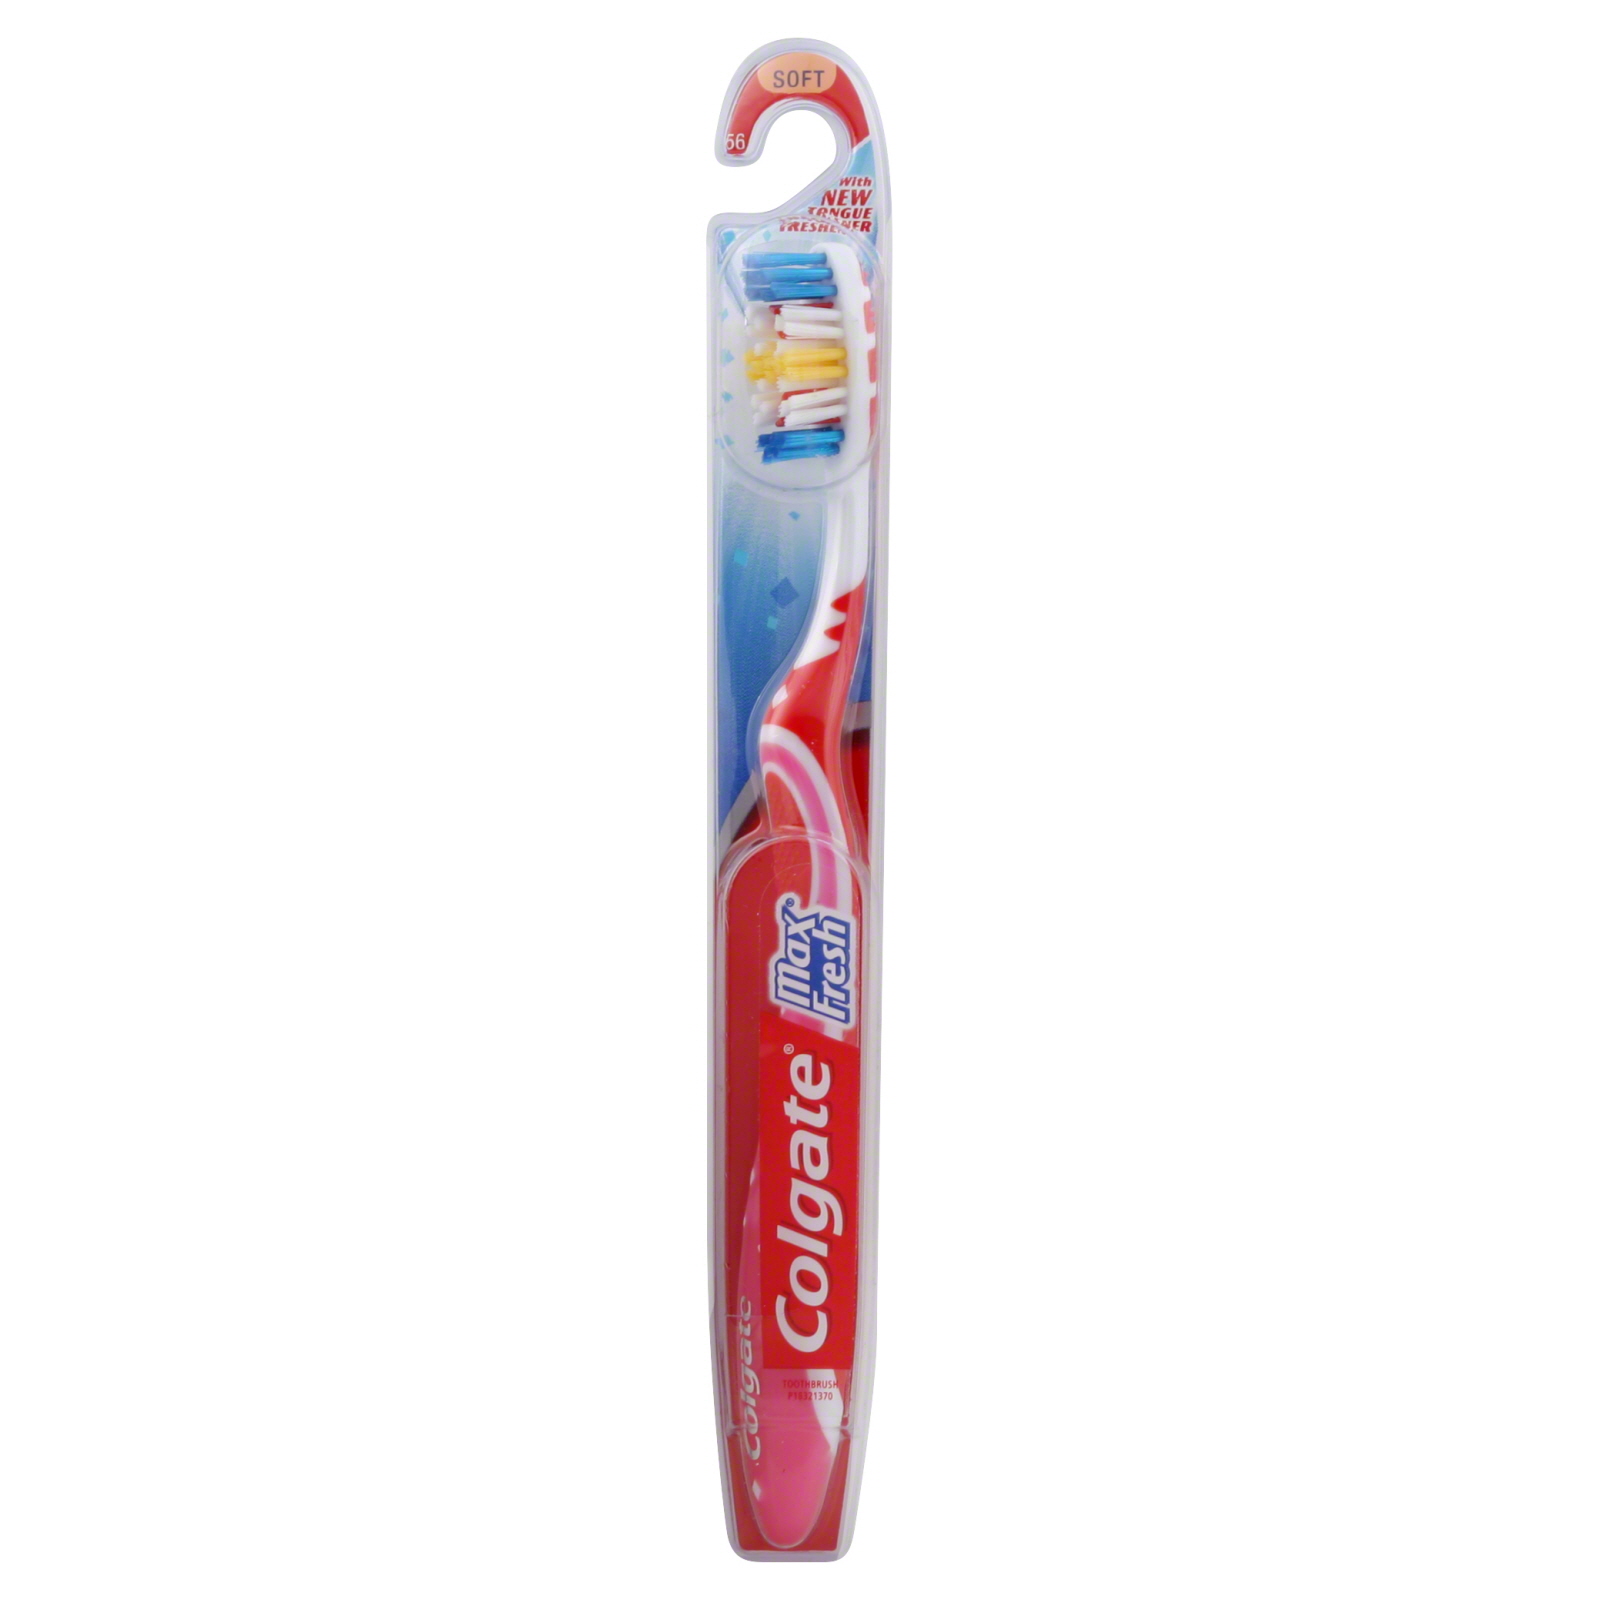 Colgate-Palmolive MaxFresh Toothbrush, Scented, Soft, Full Head 56, 1 toothbrush